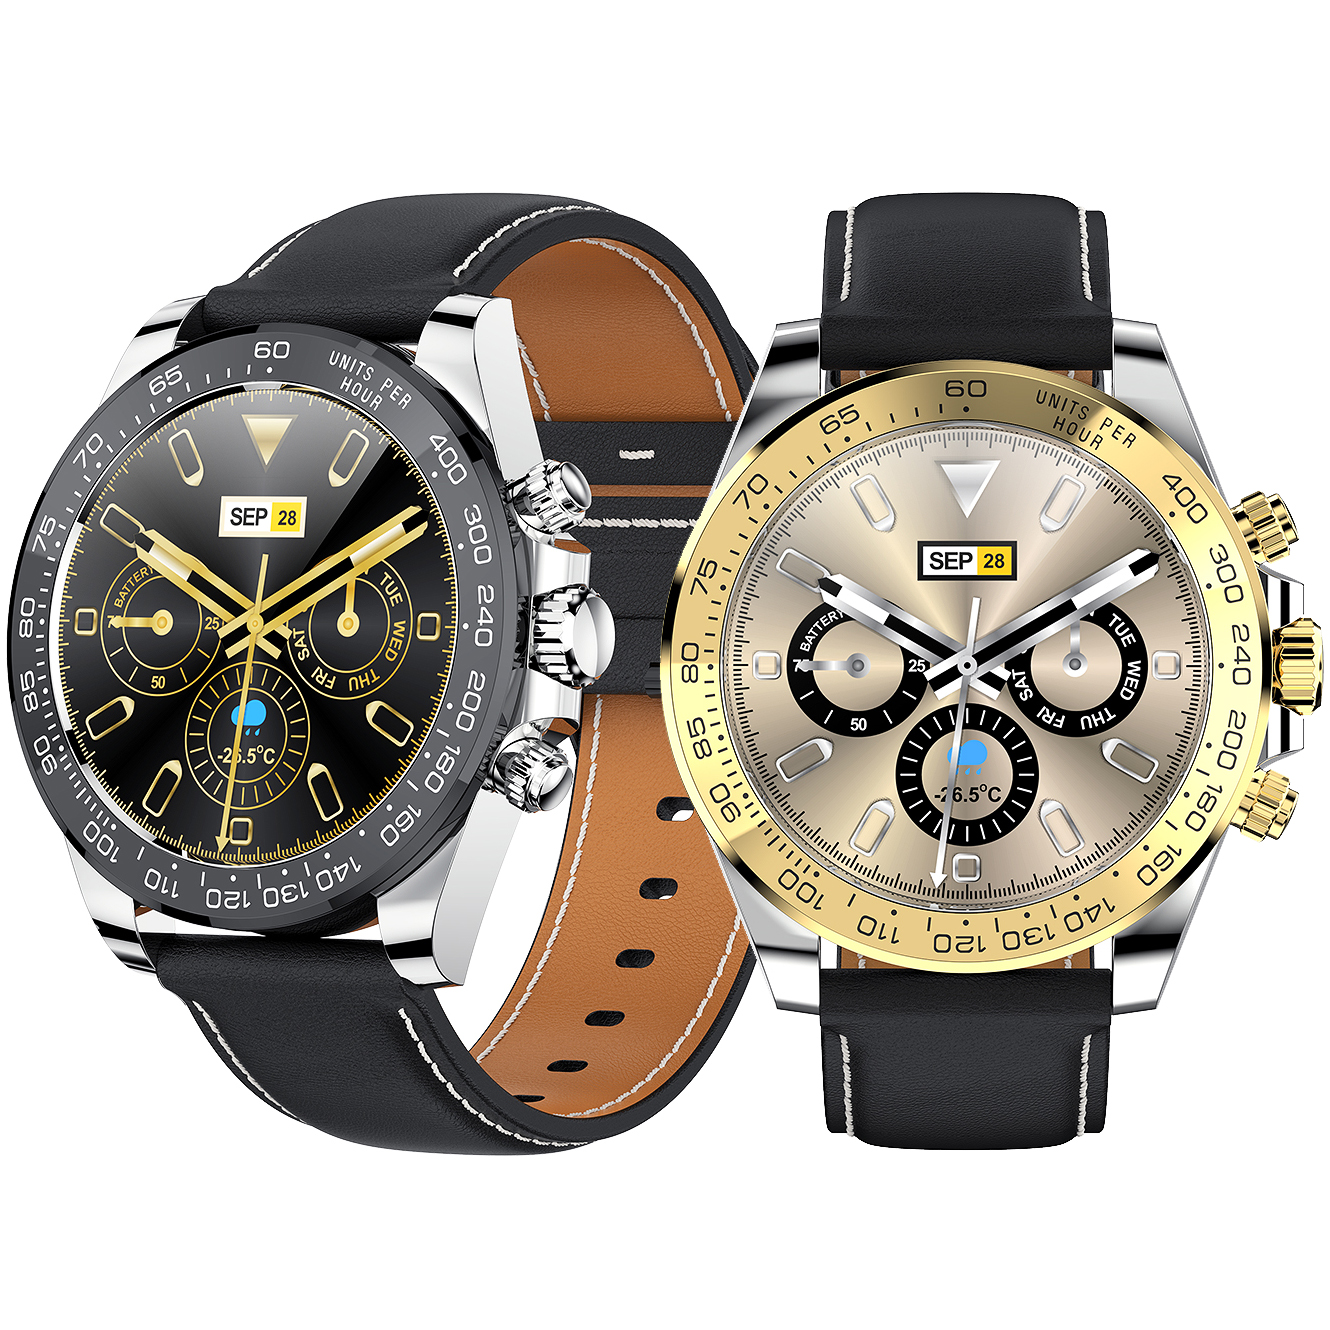 Find Bakeey AW13 1 3 inch IPS Full Touch Screen Heart Rate Monitor Multi Sports Modes 280mAh Long Standby IP68 Waterproof BT5 2 Smart Watch for Sale on Gipsybee.com with cryptocurrencies